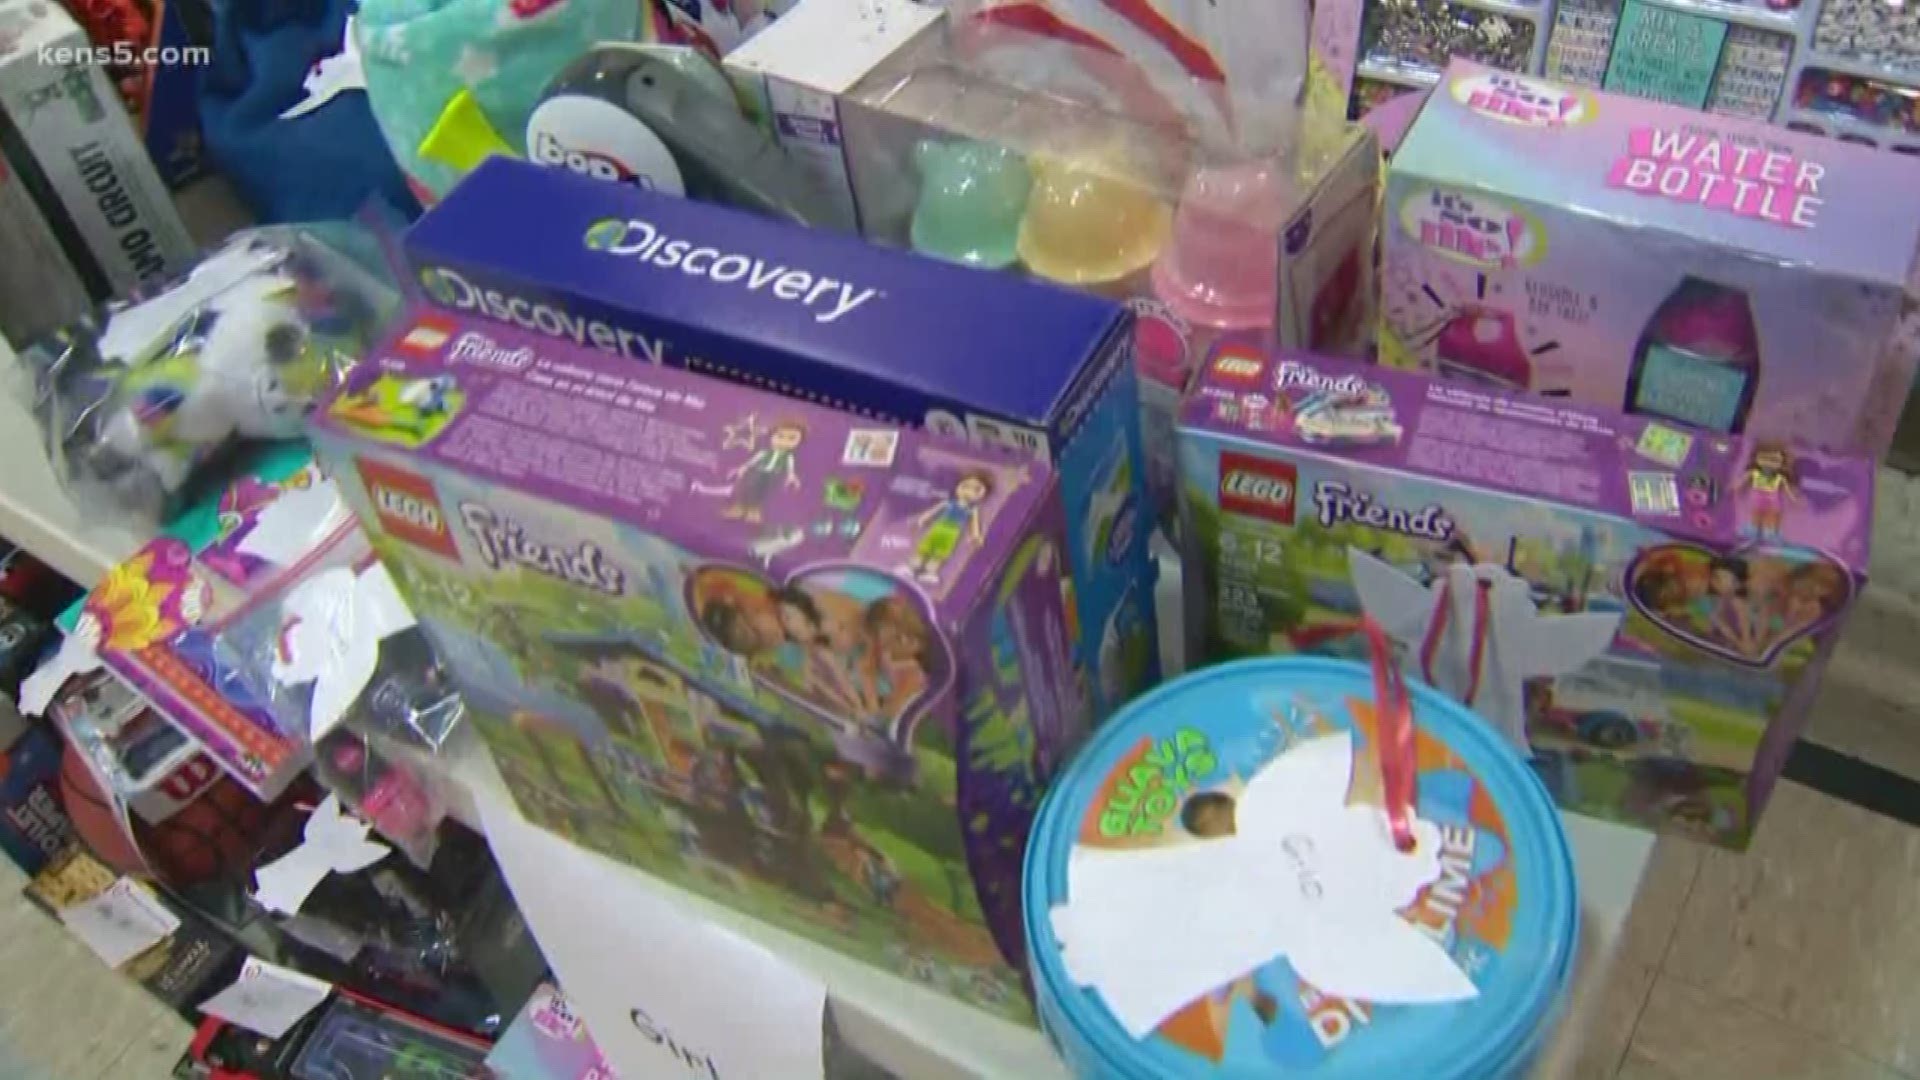 Christmas comes early for hundreds of families who need a little help to make the holidays "happy" this year.